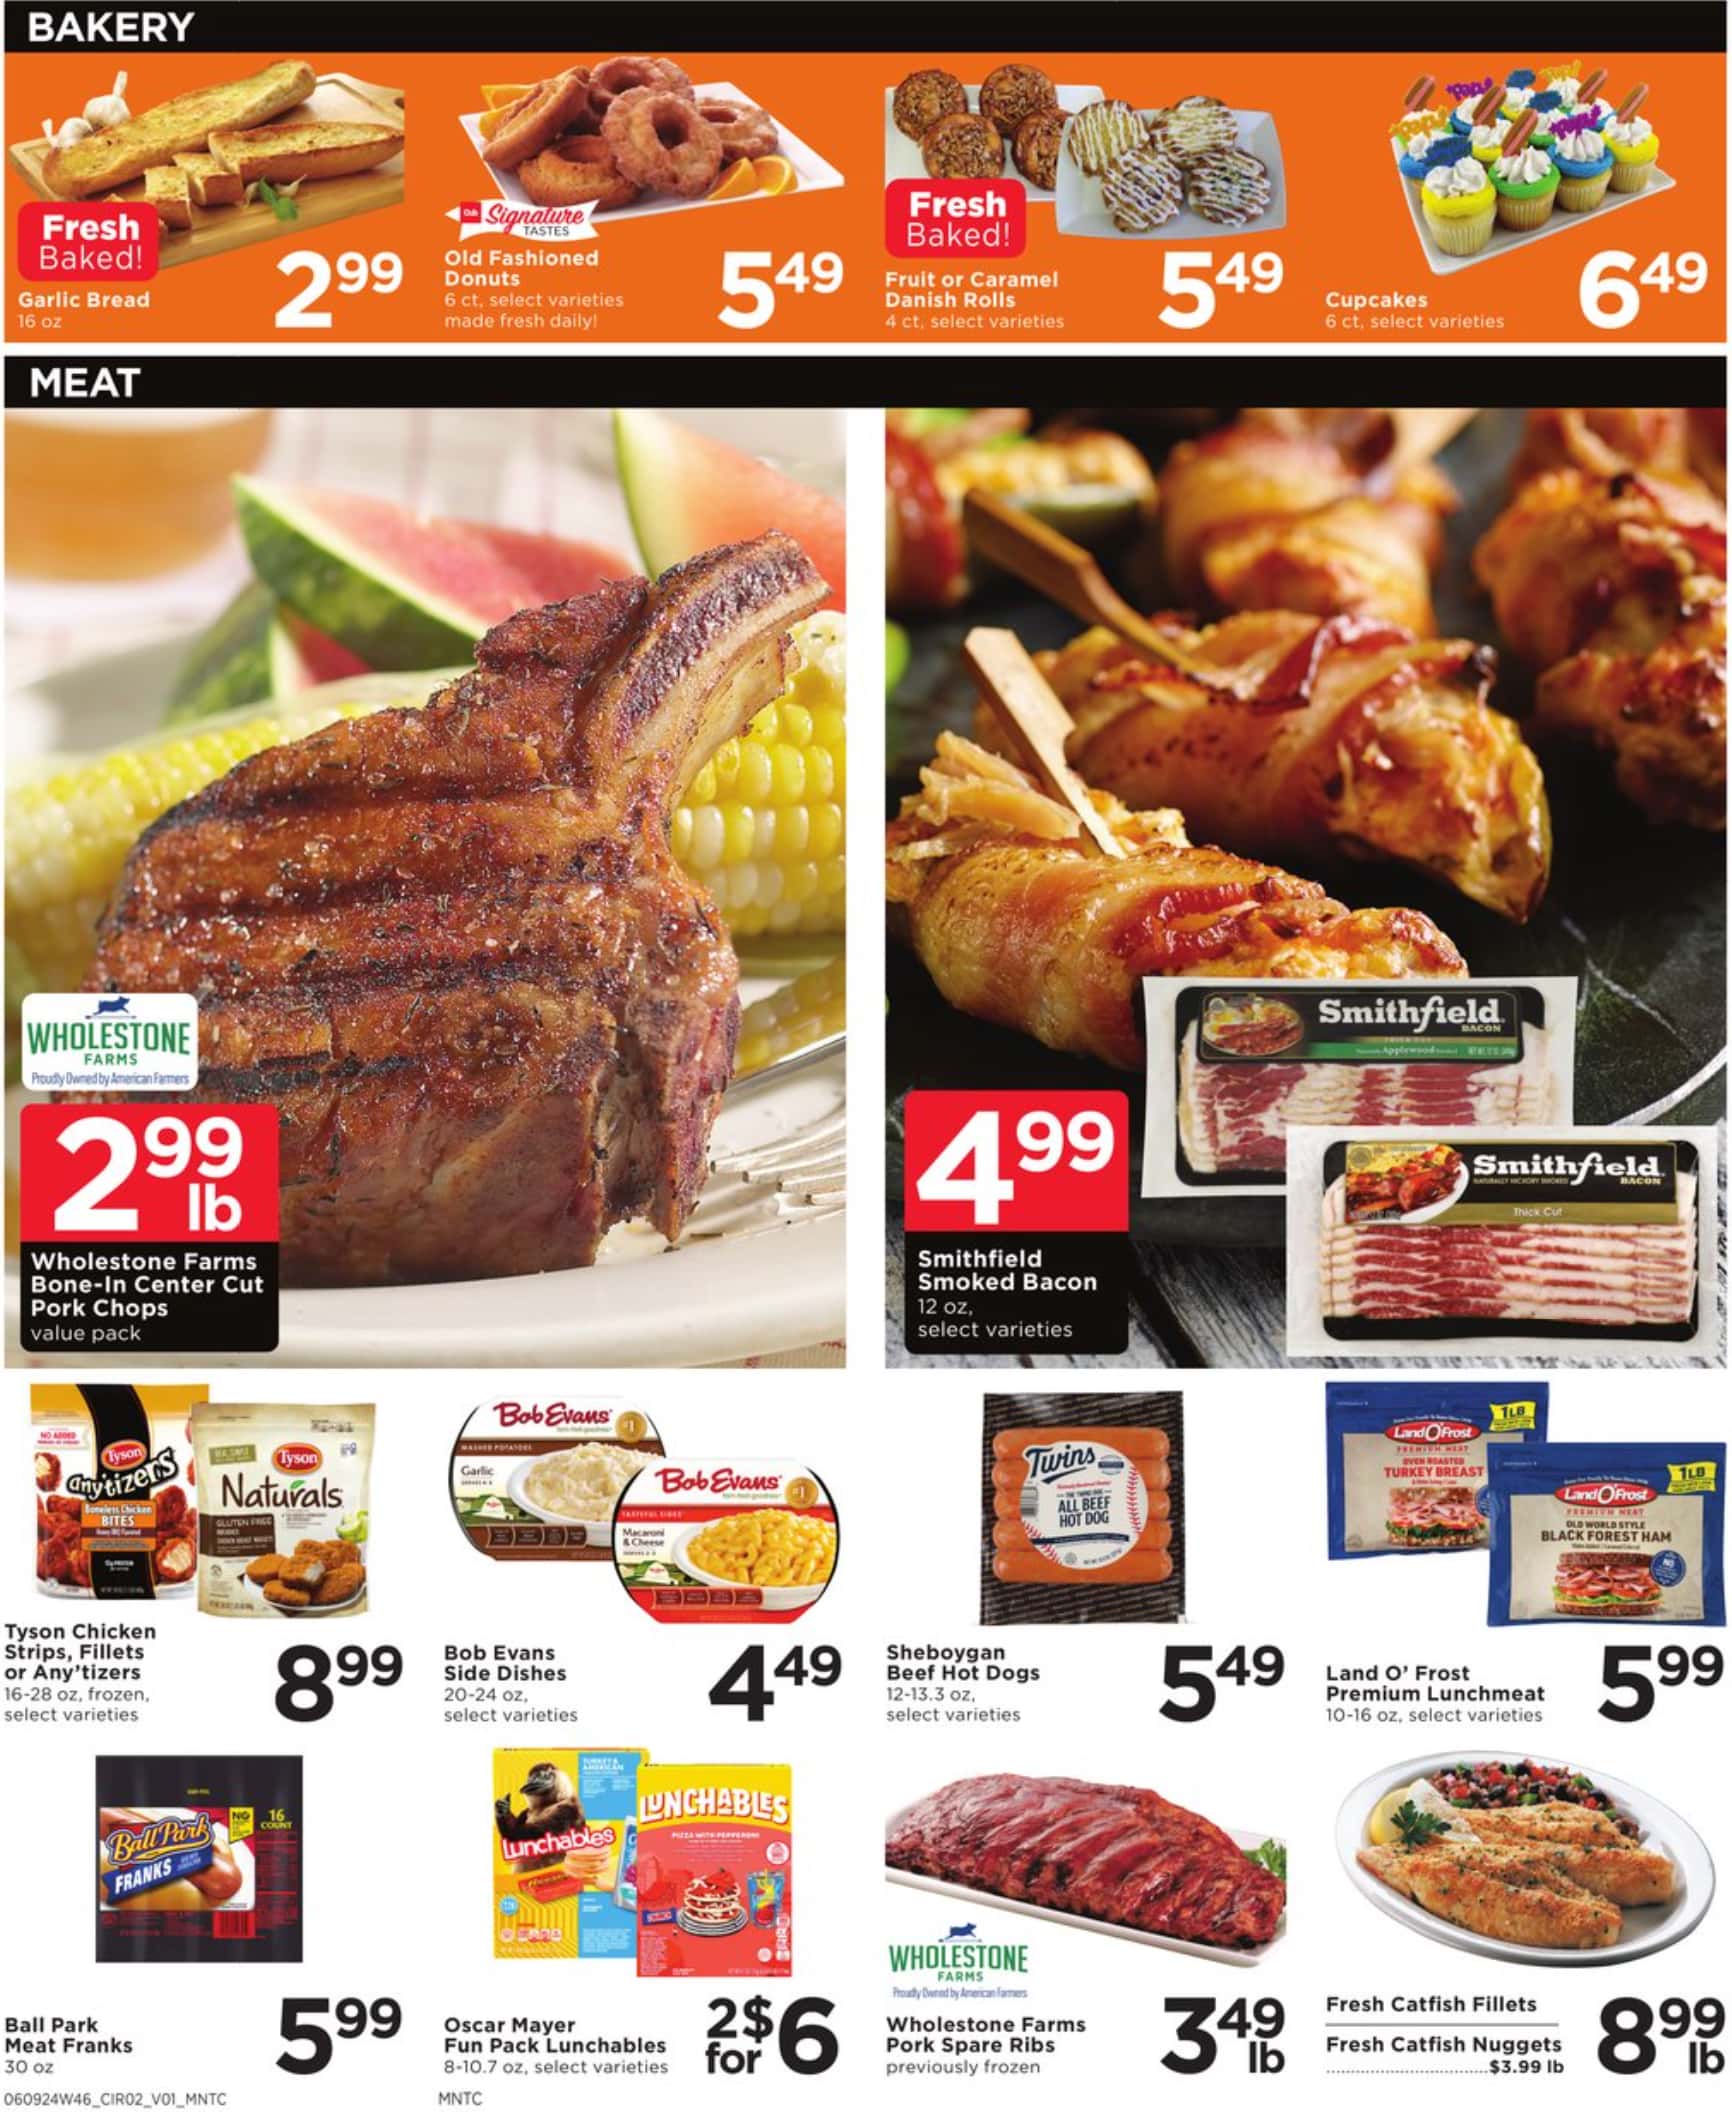 Cub Foods July 2024 Weekly Sales, Deals, Discounts and Digital Coupons.